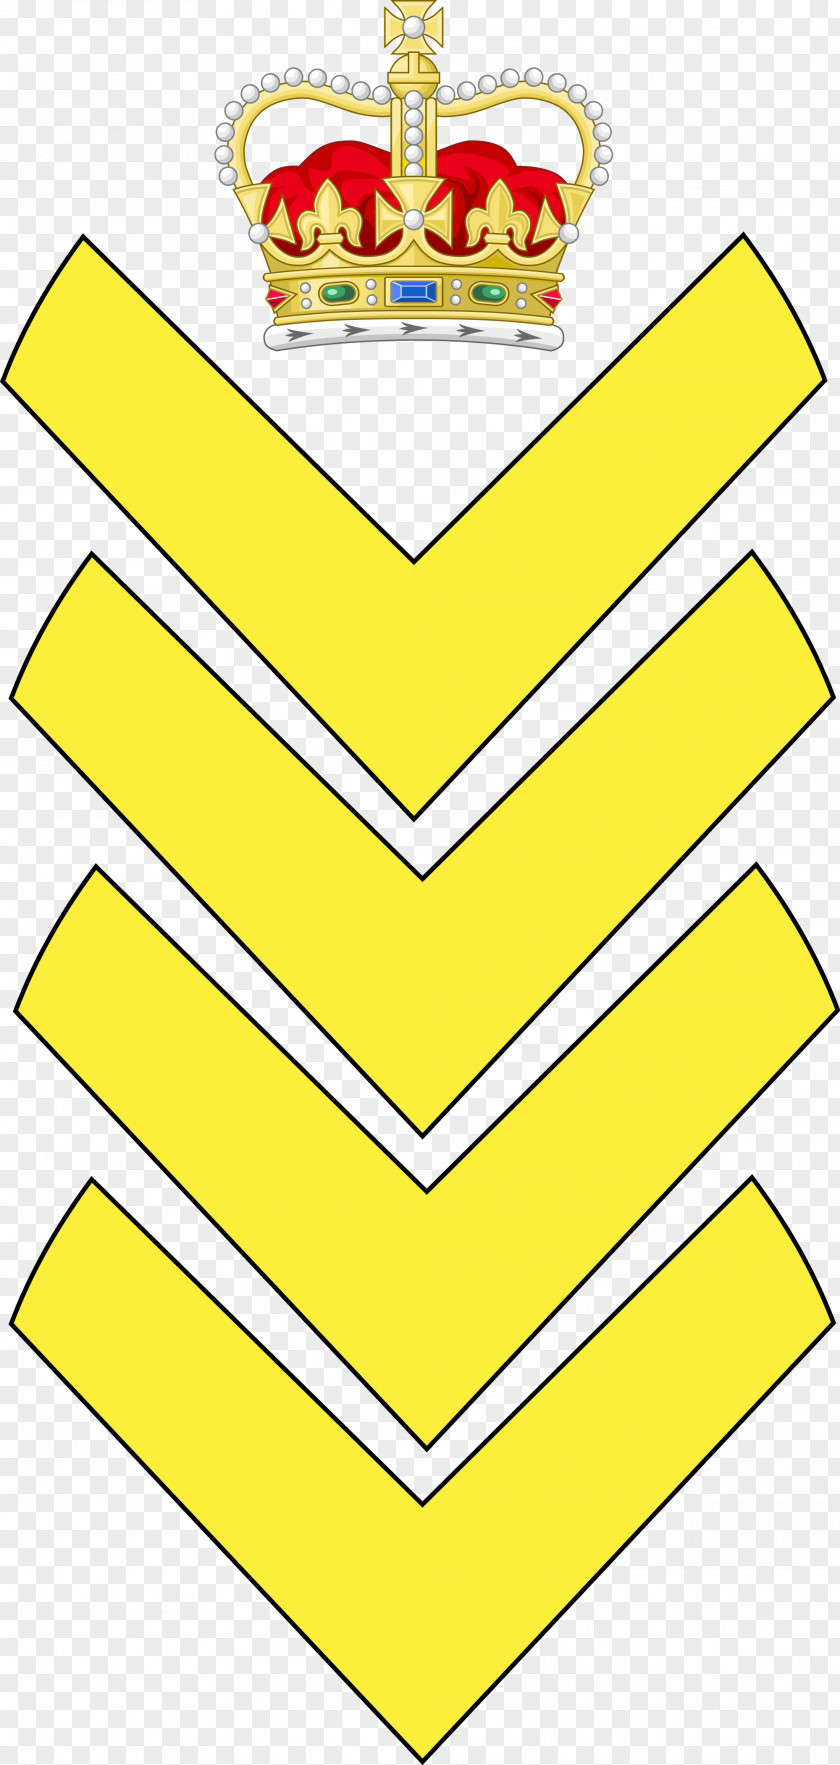 Military Royal Canadian Mounted Police Sergeant Major Rank PNG